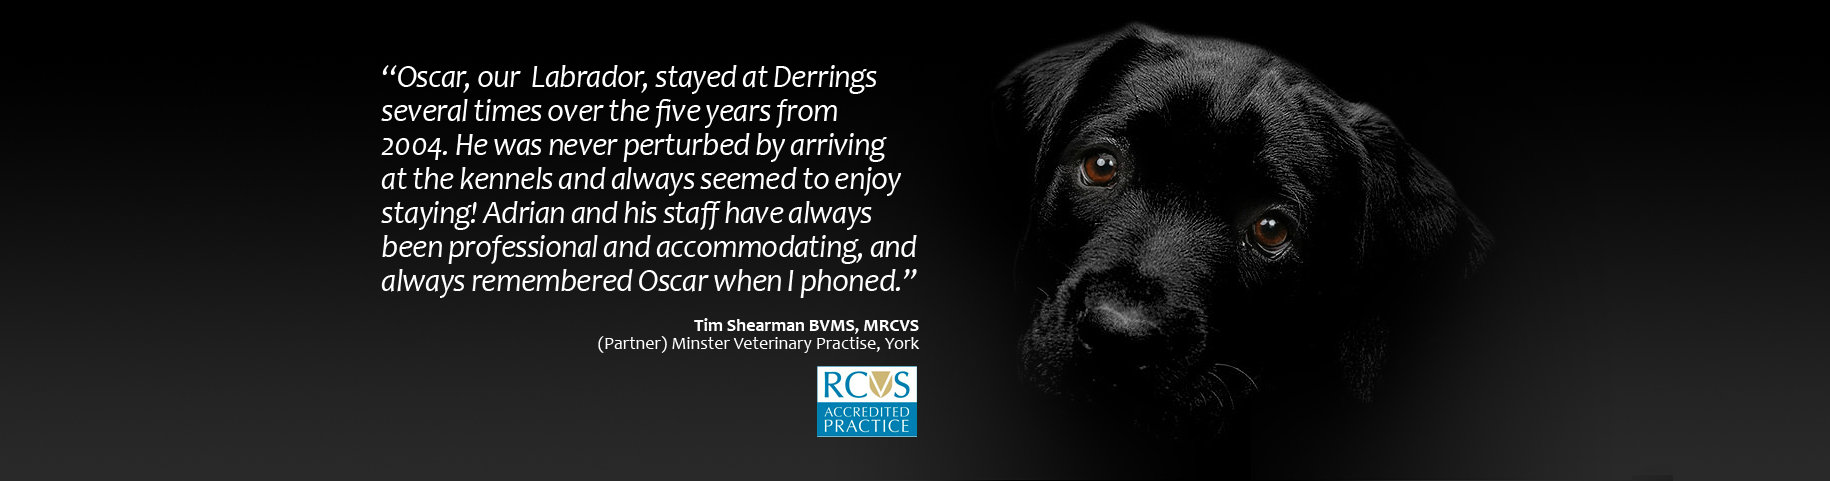 The services we offer come highly recommended by our amazing customers & pets